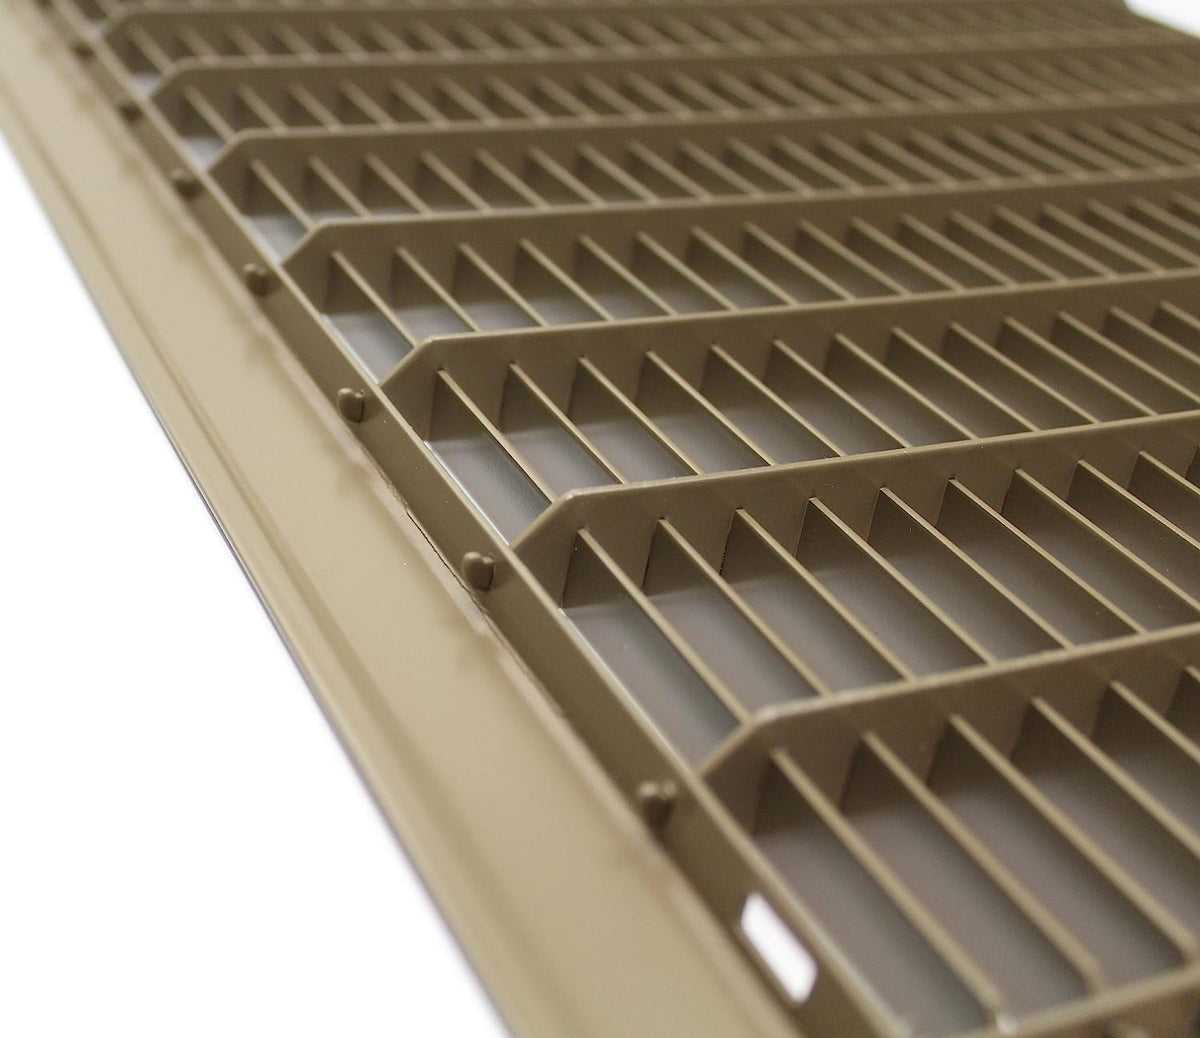 20&quot; X 20&quot; Heavy Duty Floor Grille - Fixed Blades Air Grille - Brown [Outer Dimensions: 21.75 X 21.75]